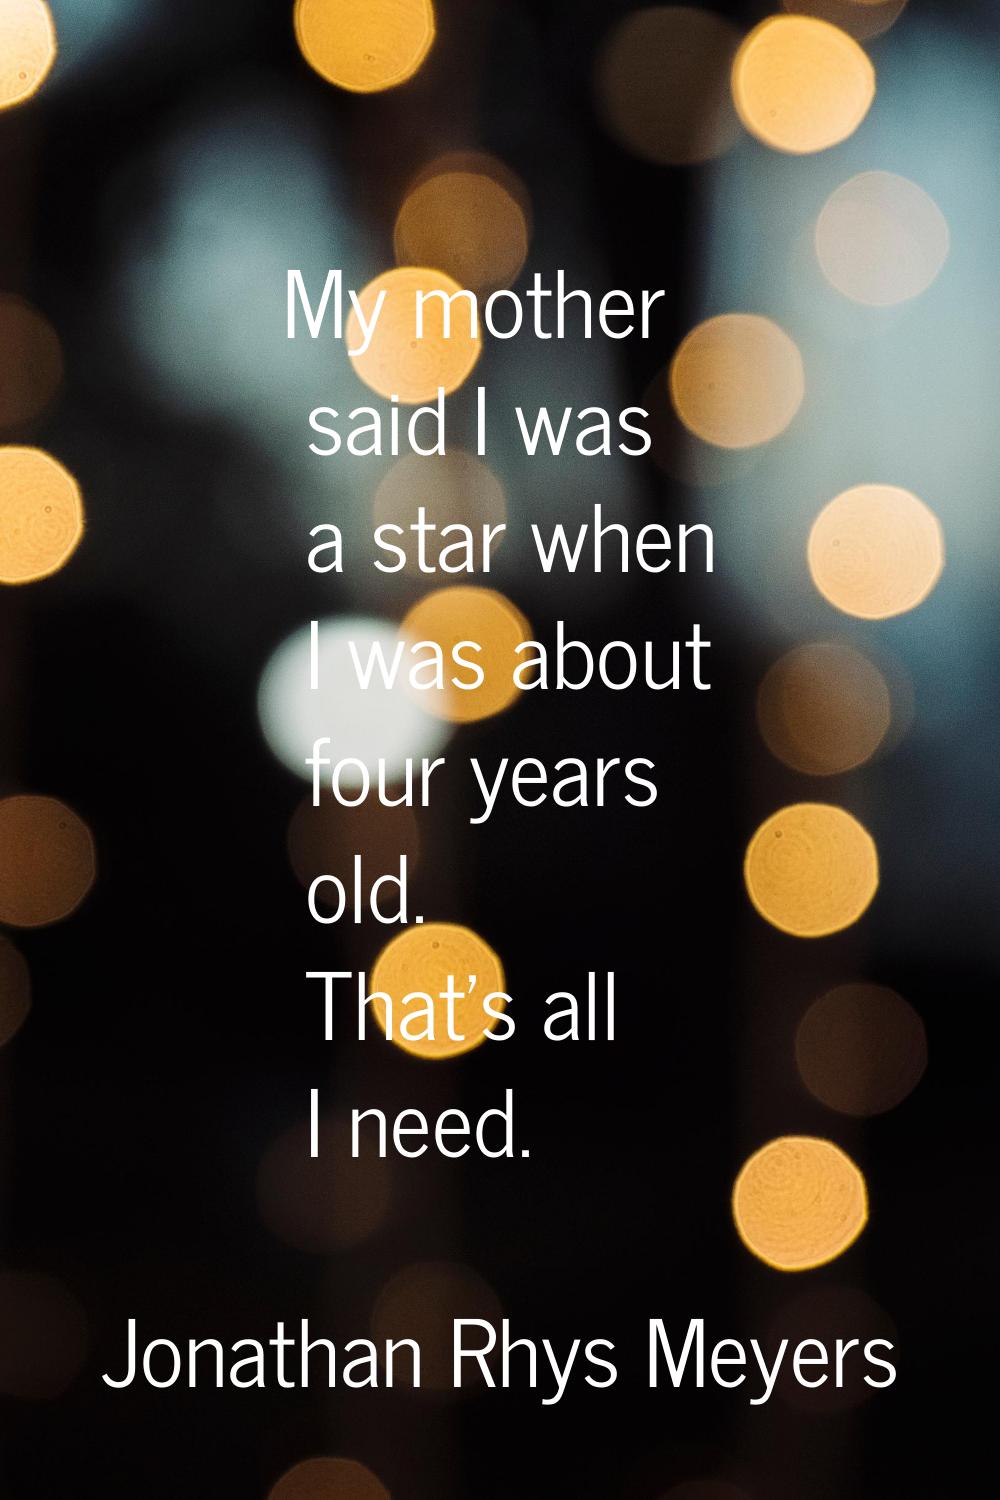 My mother said I was a star when I was about four years old. That's all I need.